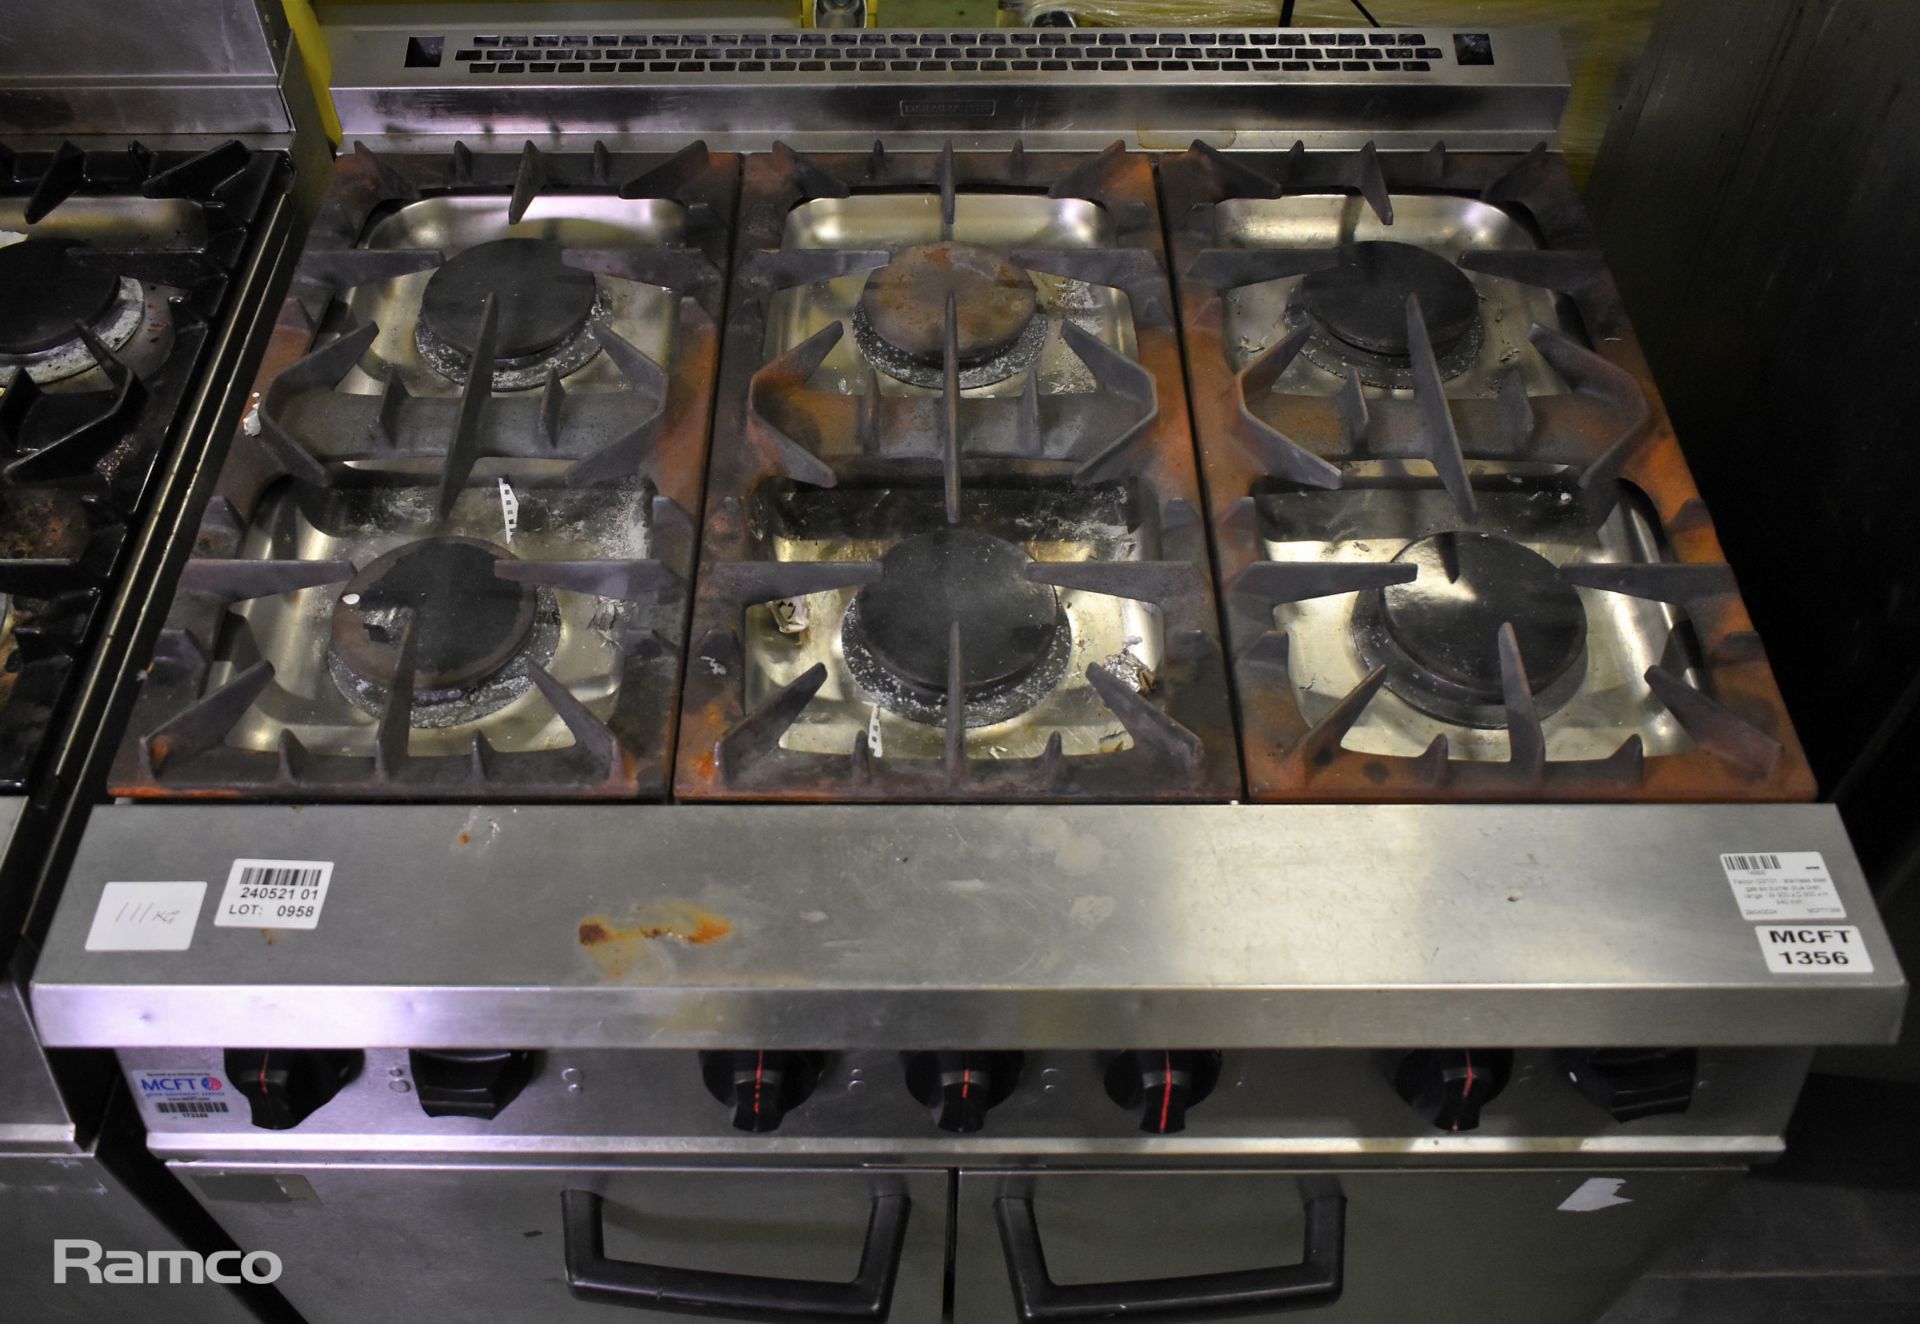 Falcon G3101 stainless steel gas six burner plus oven range - W 900 x D 900 x H 940mm - Image 2 of 7